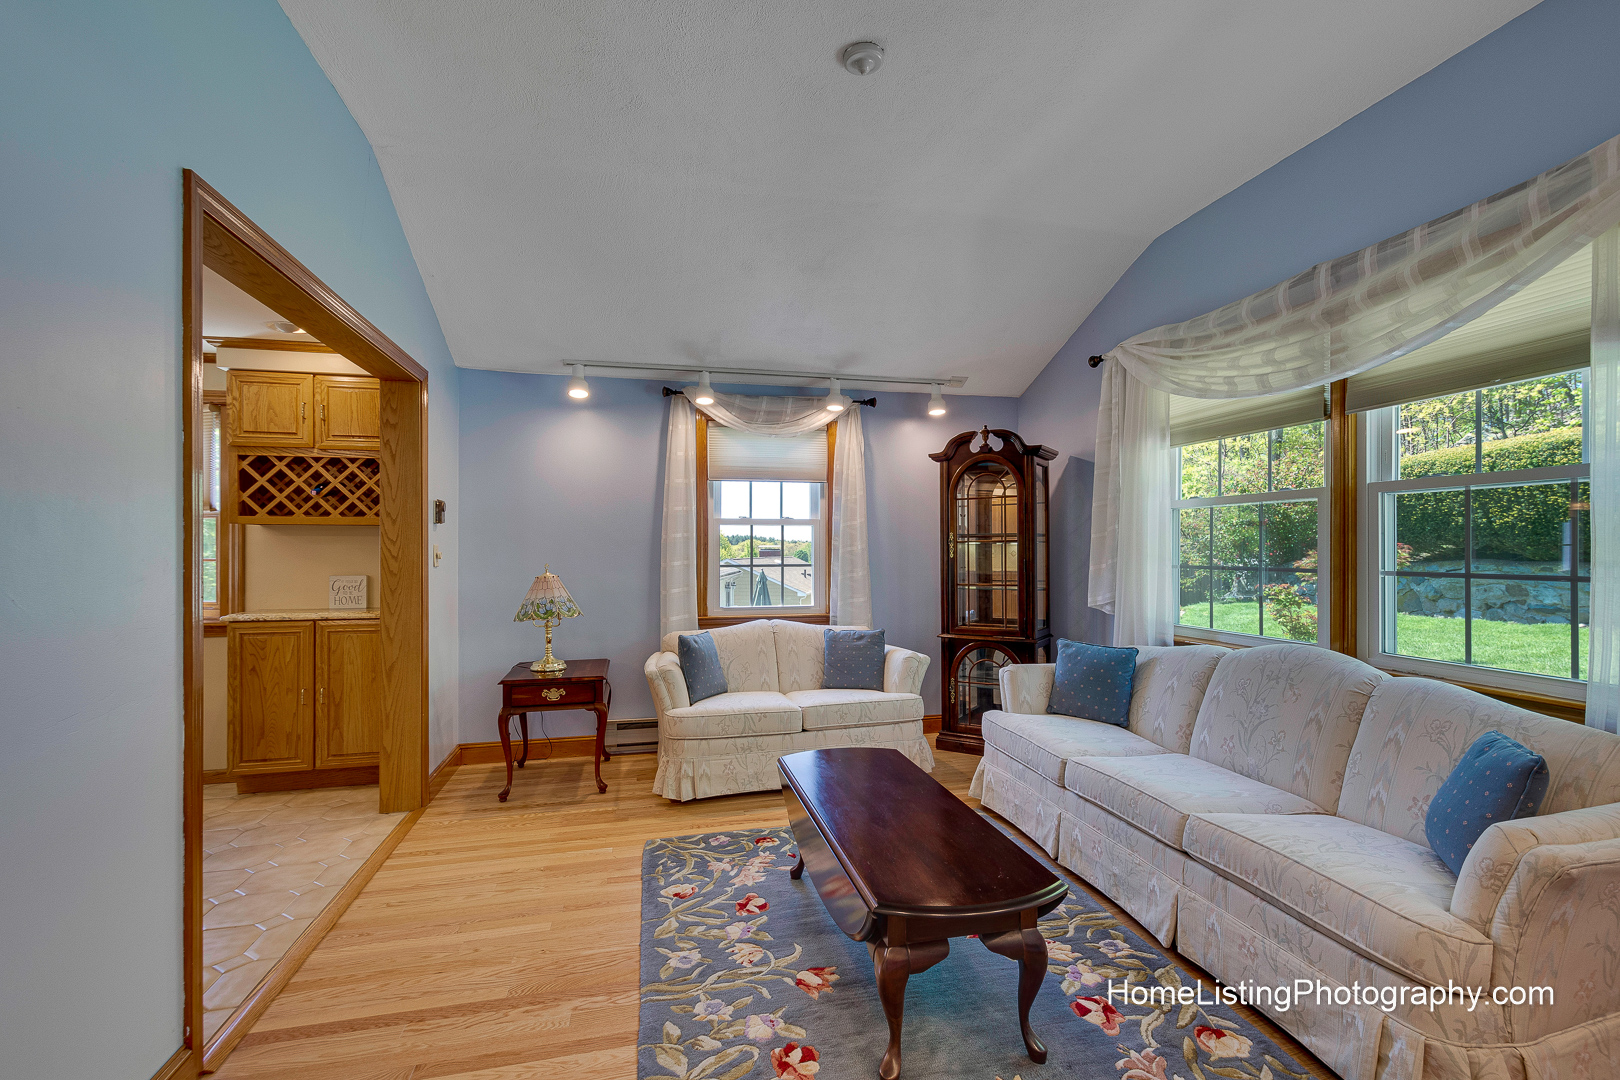 Thomas Adach - Stoneham MA professional real estate photographer - 508-655-2225 Home Listing Photography